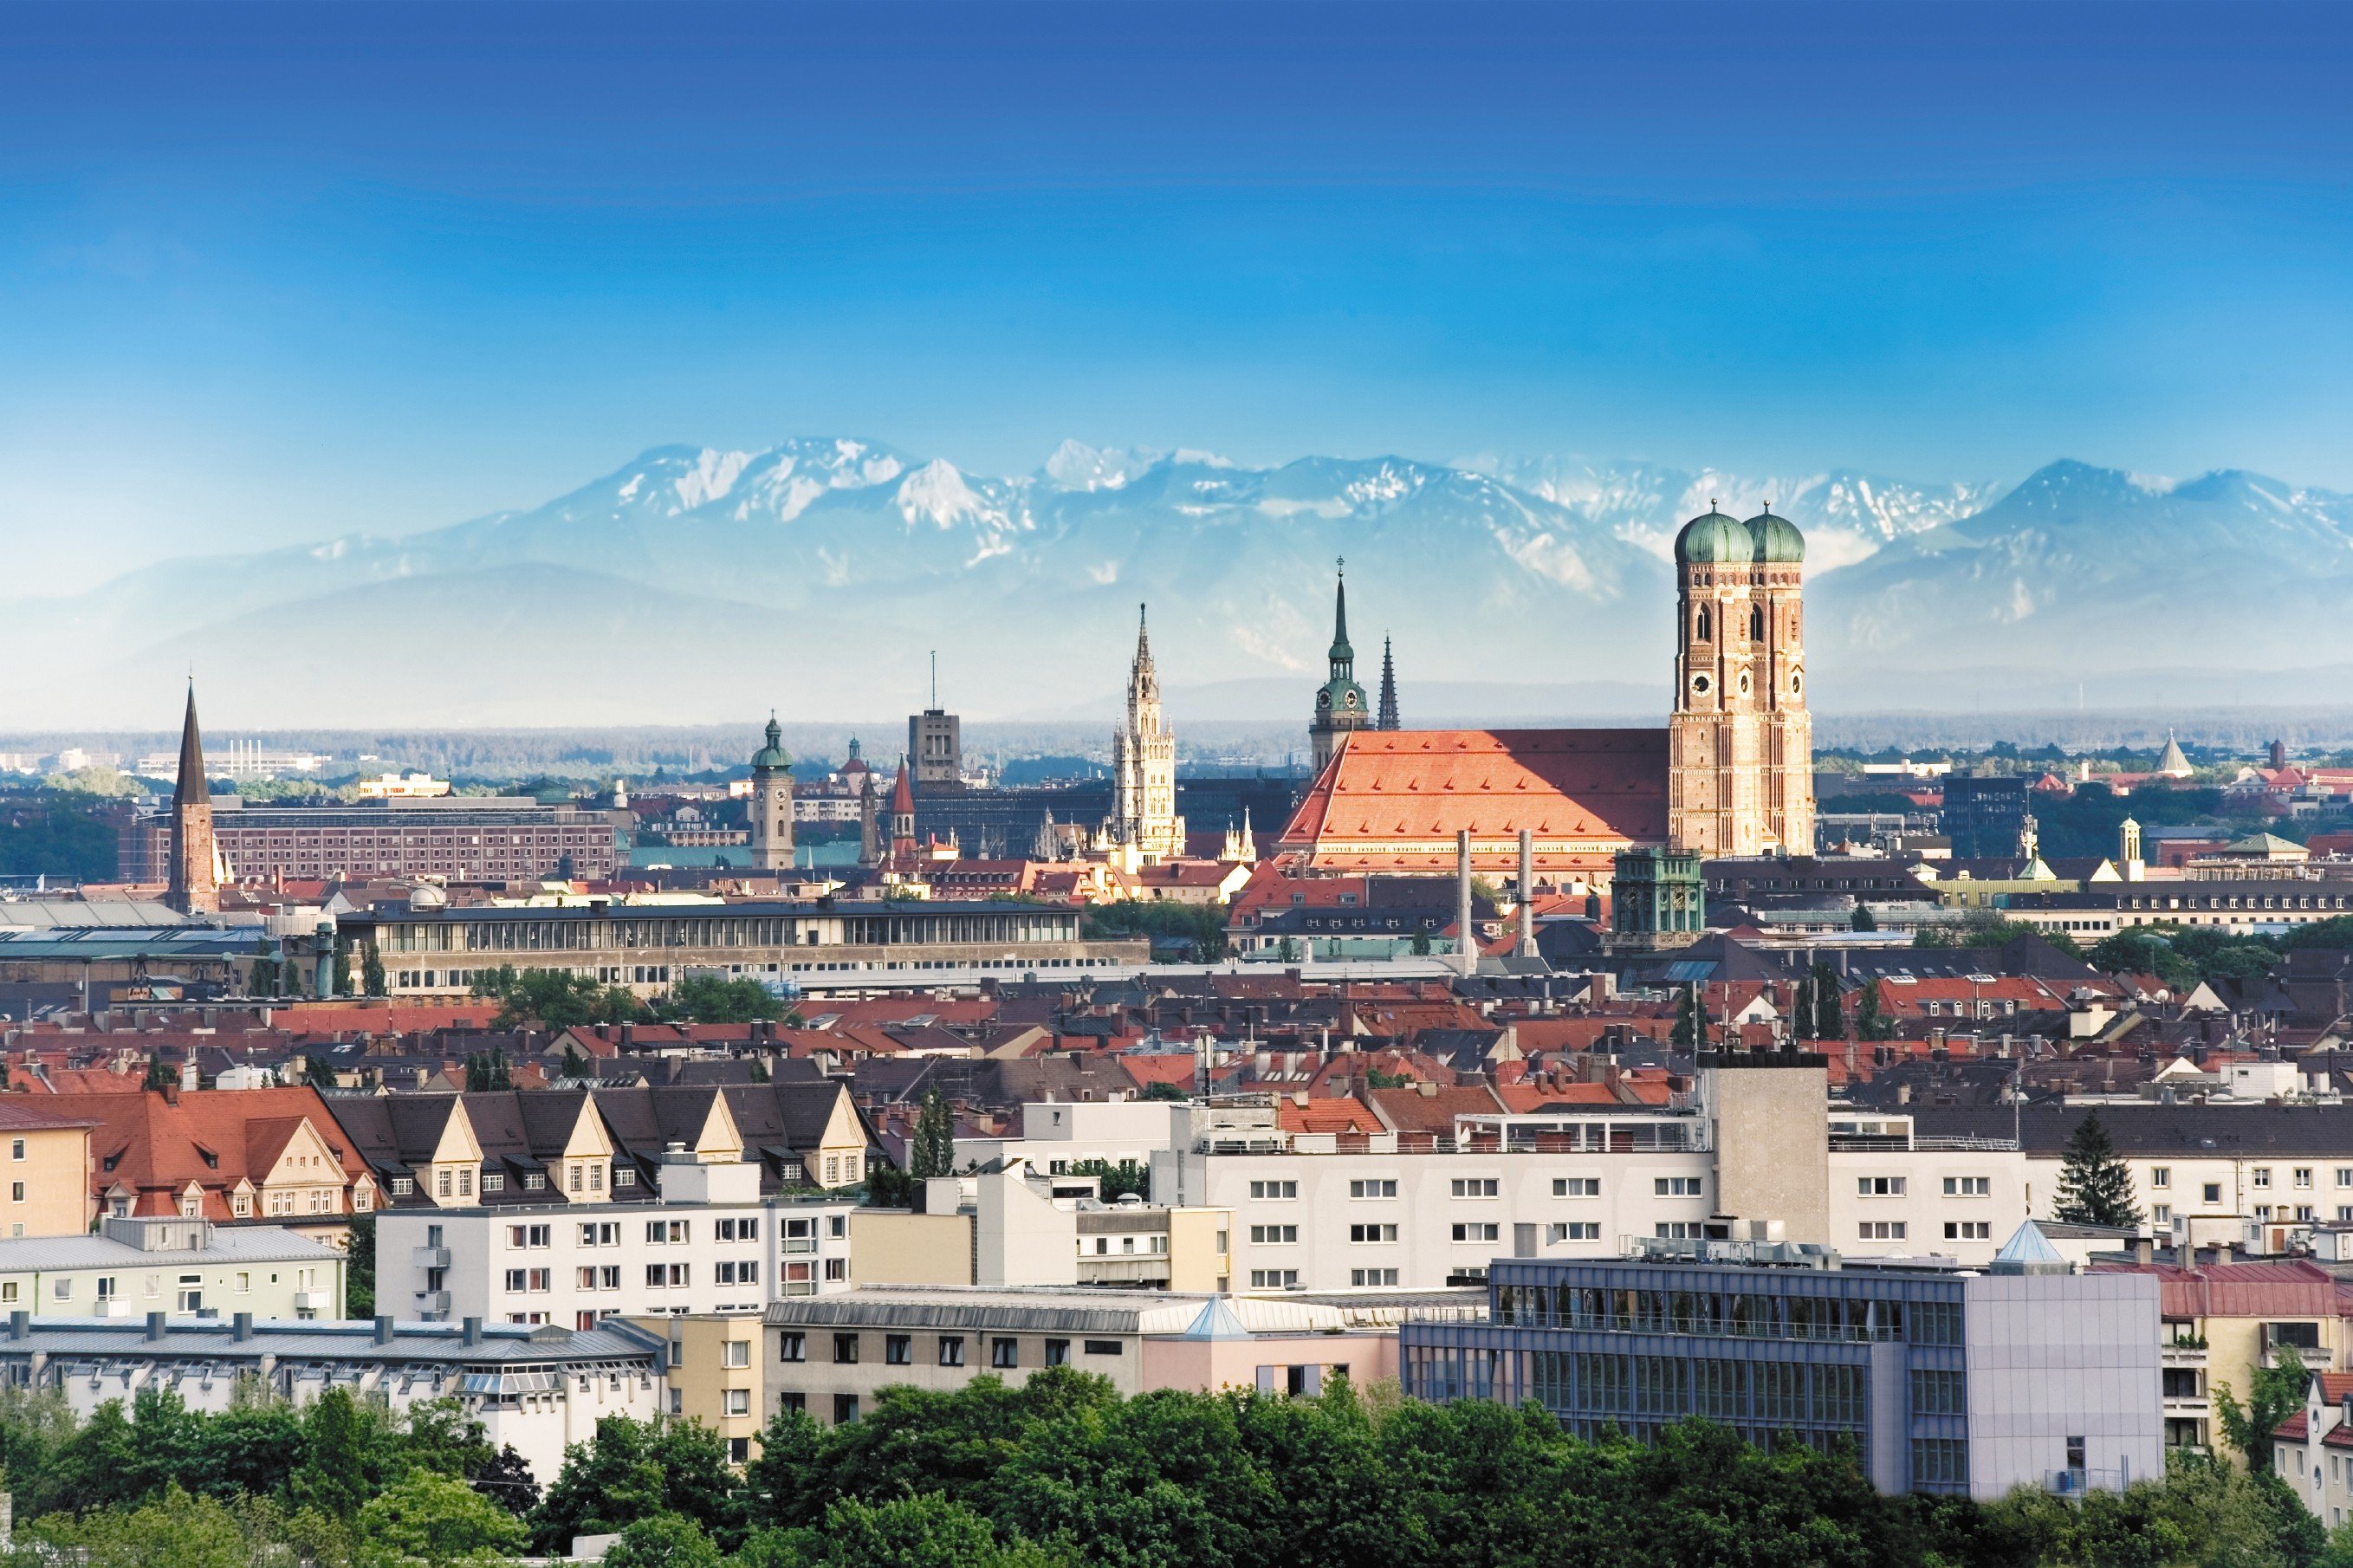 cityscape, Architecture, Building, City, Munich, Germany, House, Church, Trees, Mountain, Rooftops Wallpaper